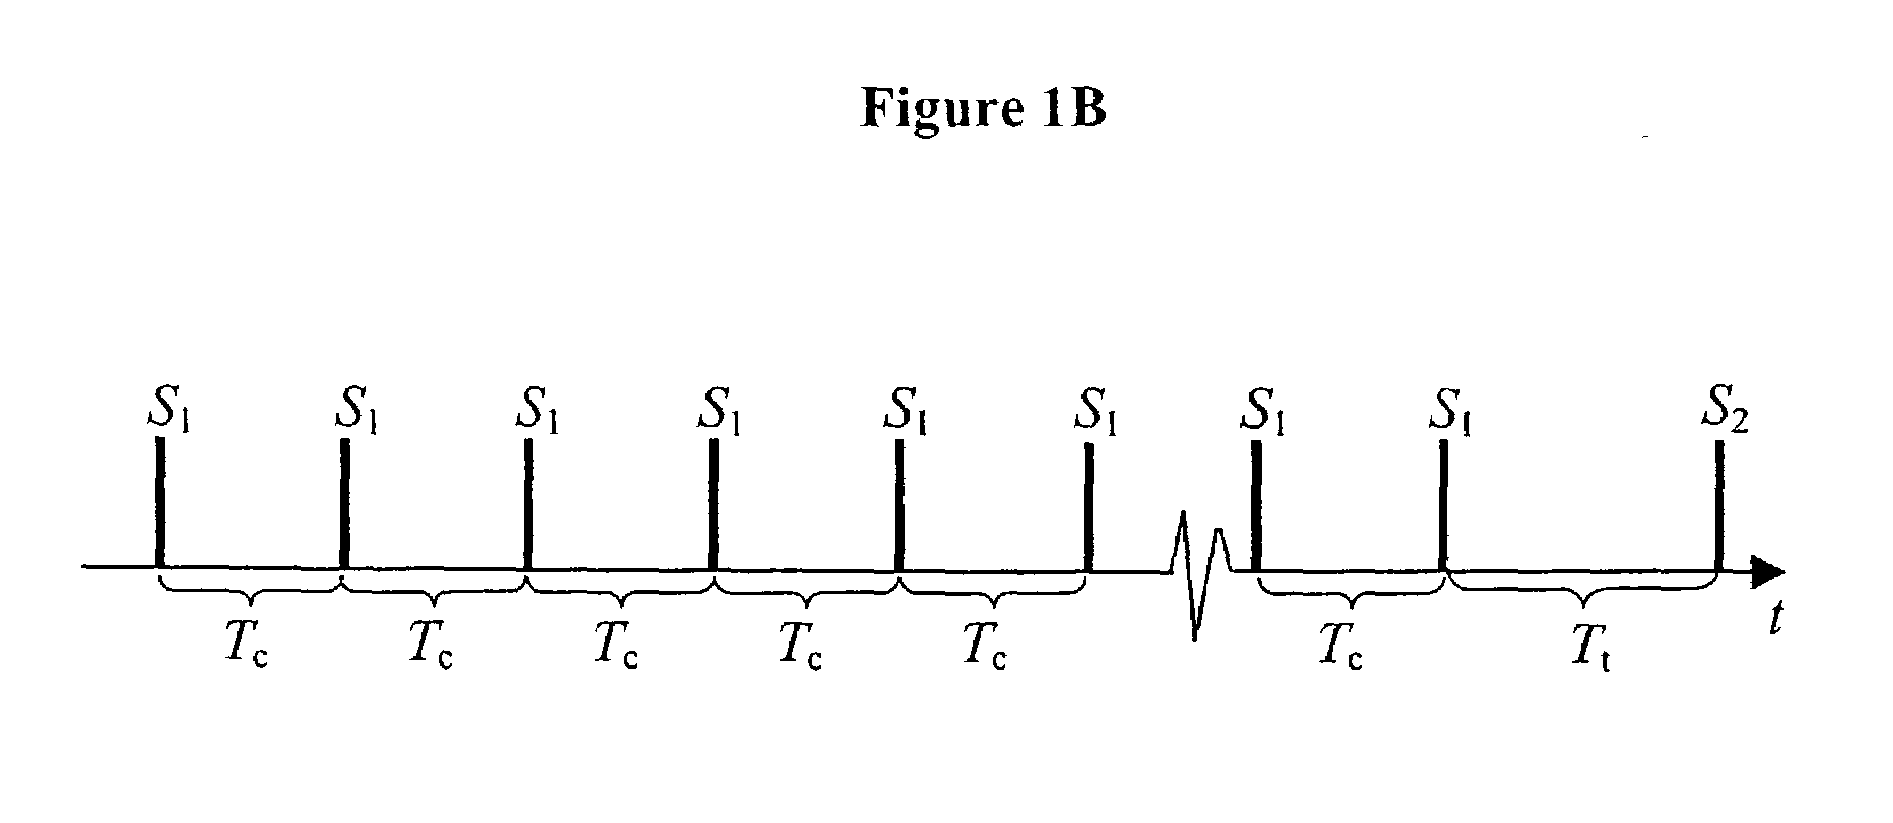 Method and system for evaluating arrhythmia risk with QT-RR interval data sets